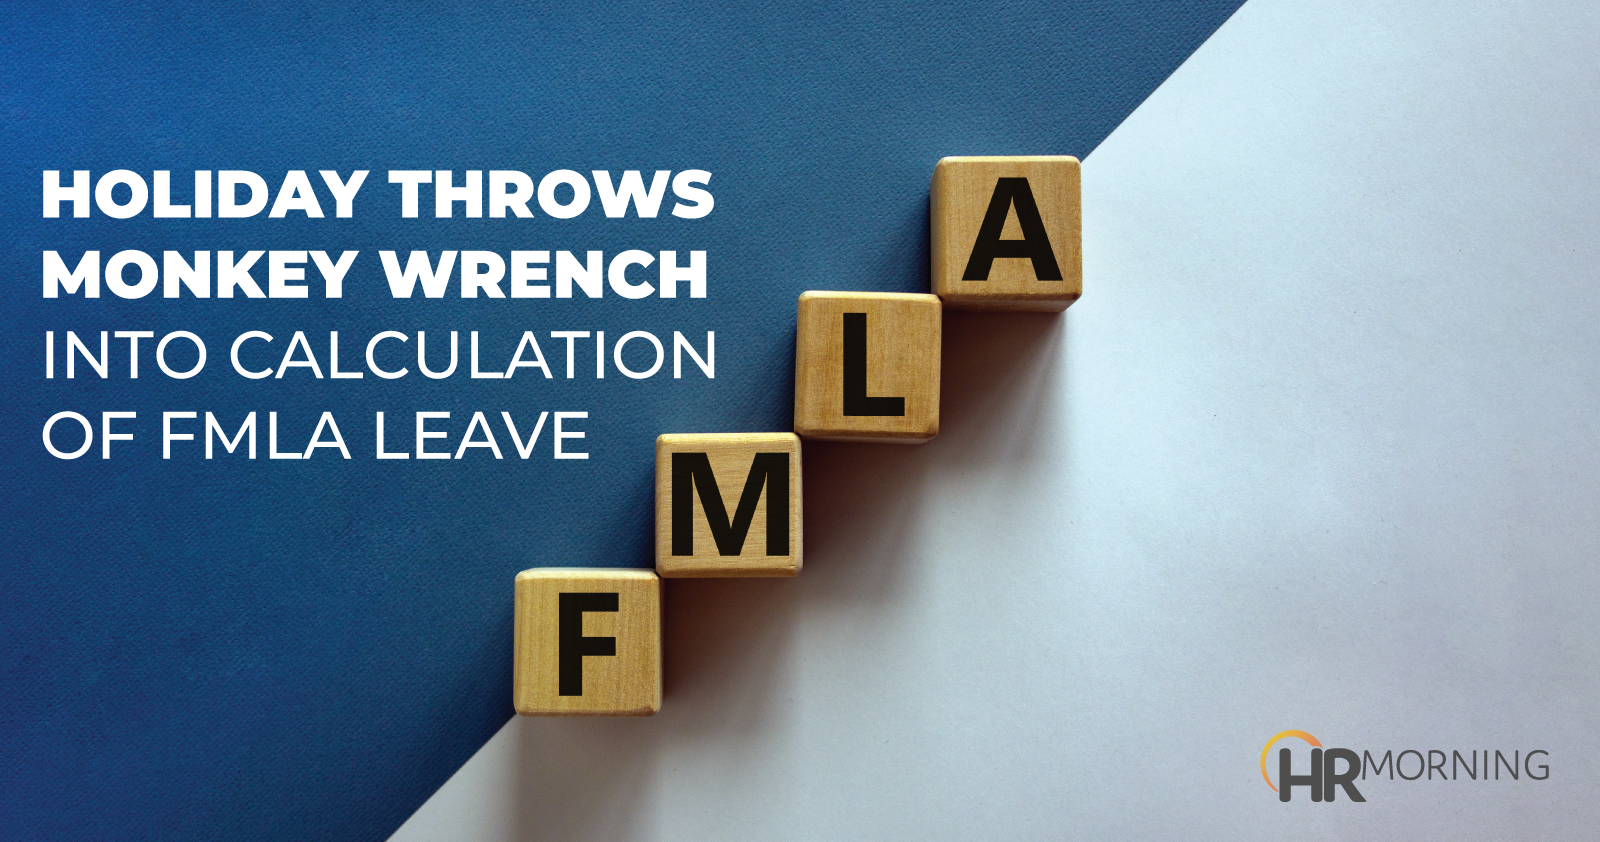 Holiday throws monkey wrench into calculation of FMLA leave